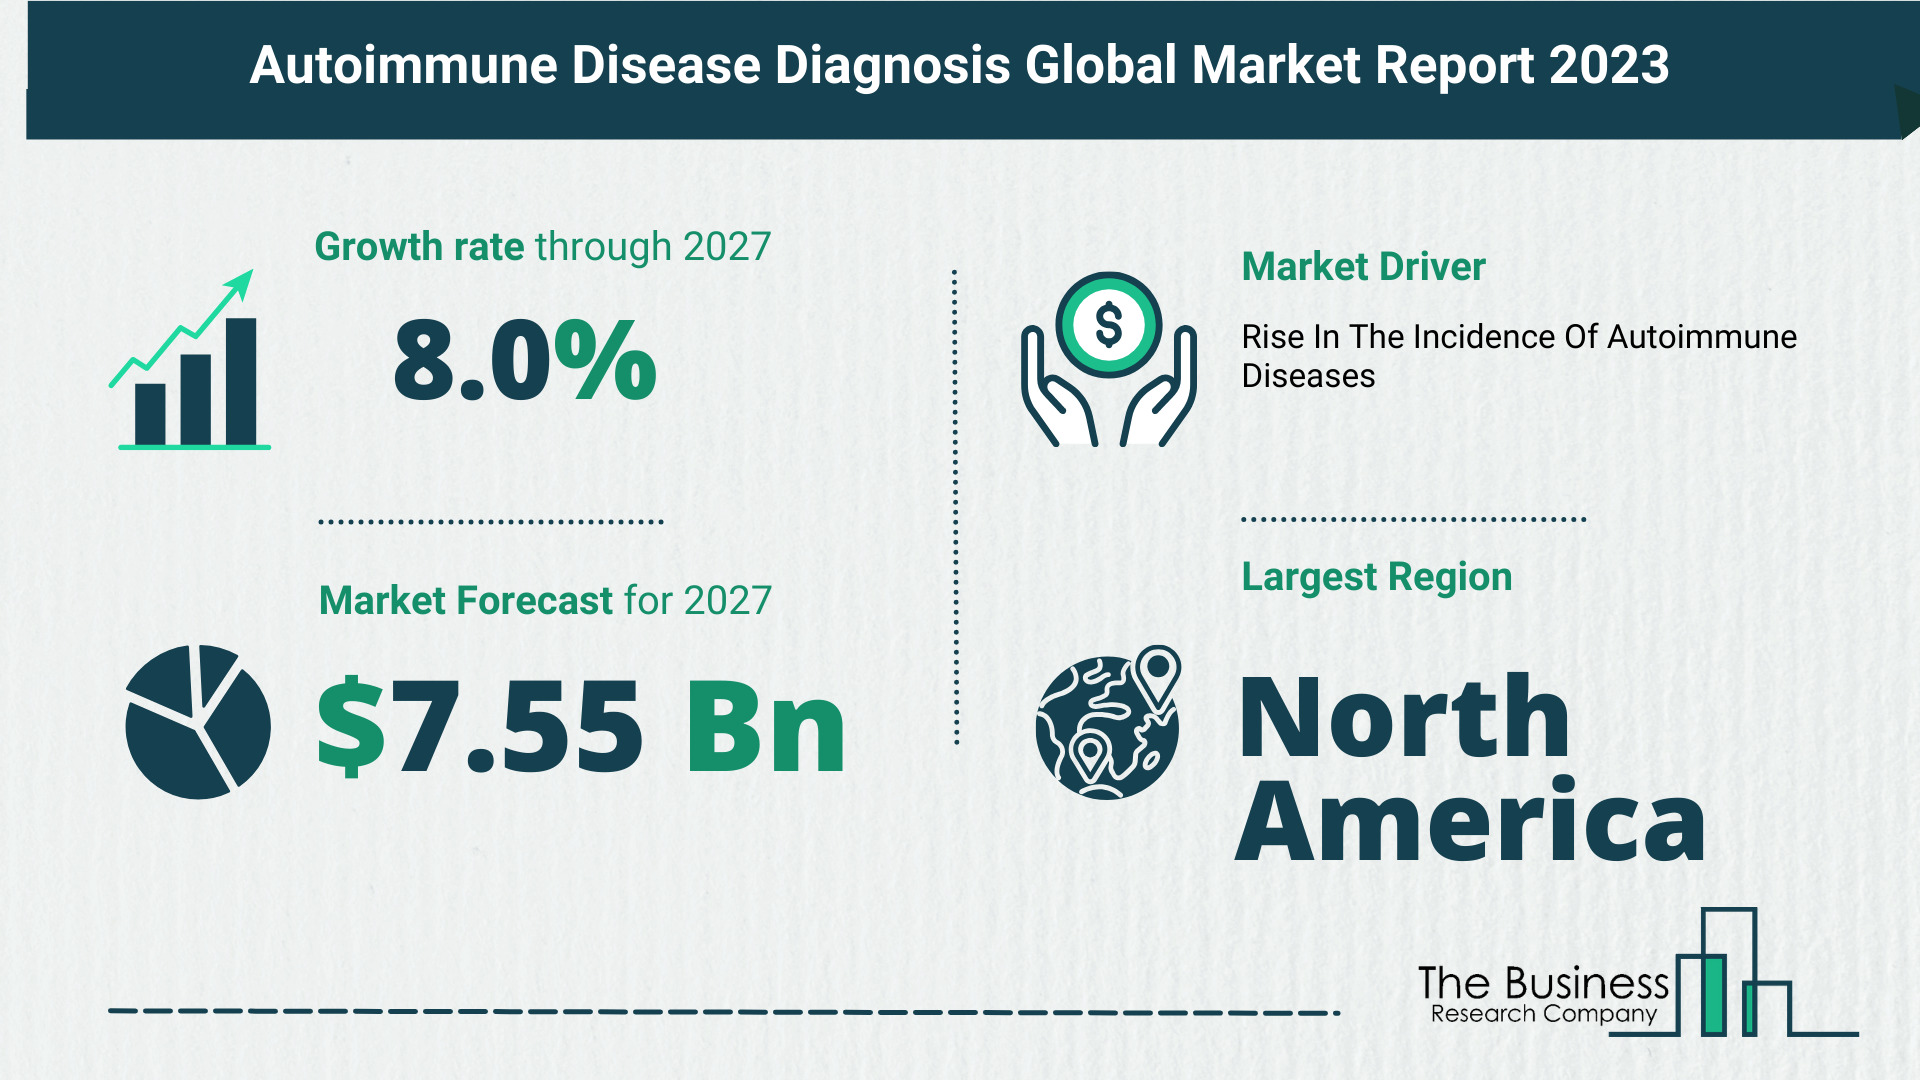 Key Trends And Drivers In The Autoimmune Disease Diagnosis Market 2023